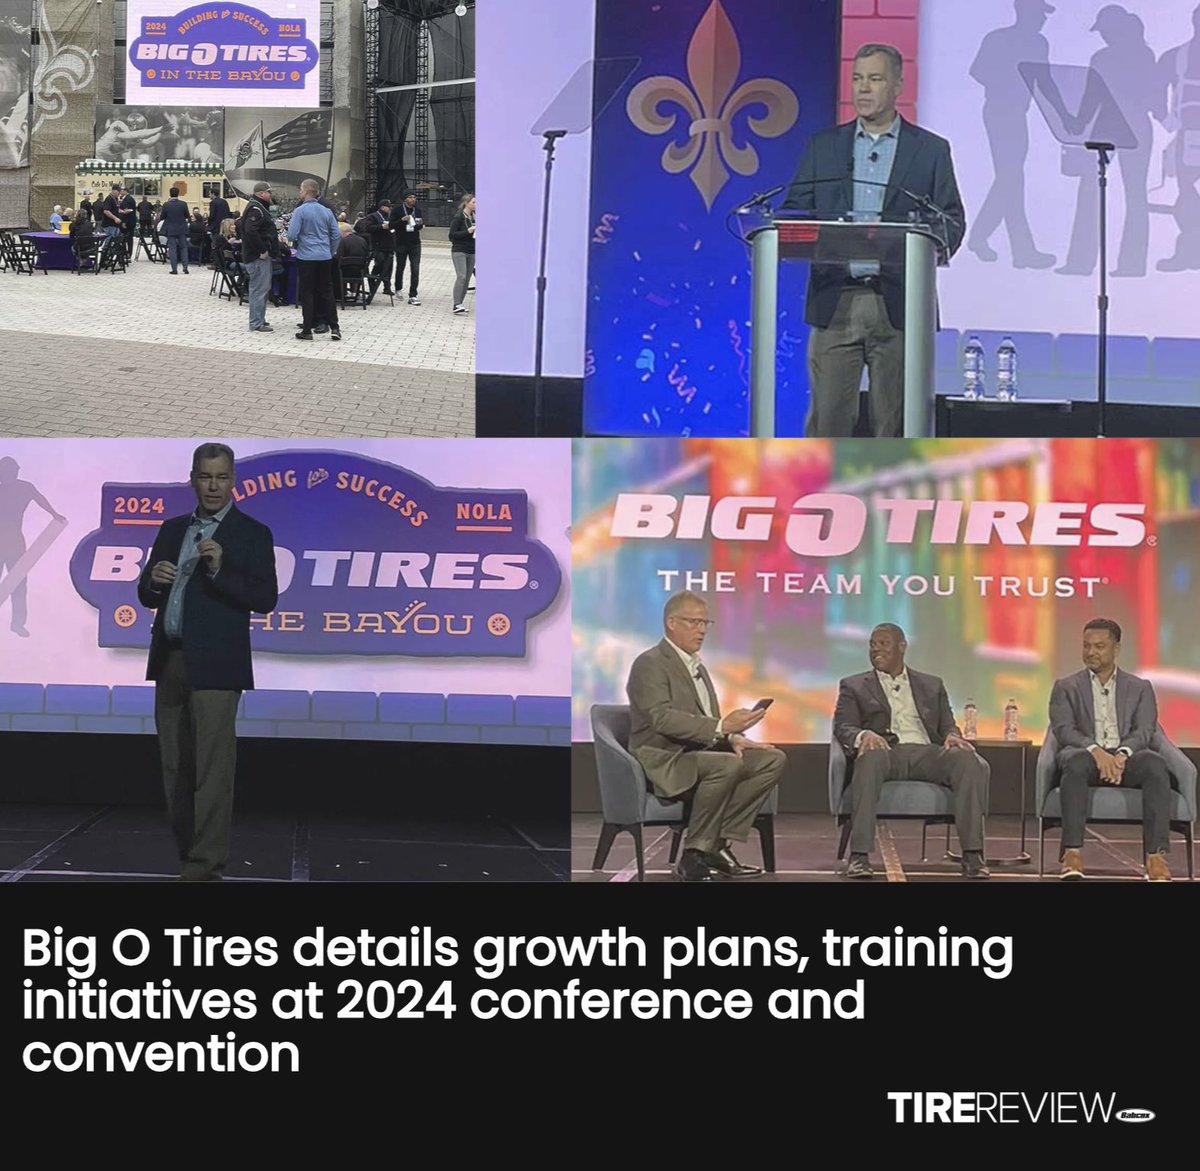 Last week, @bigotires held their 2024 conference and convention in New Orleans! The event showcased new winners of the Standing O awards and welcomed a new member into the companies’ Hall of Fame. ⭐ Read more about the event: tirereview.com/2024-big-o-tir…